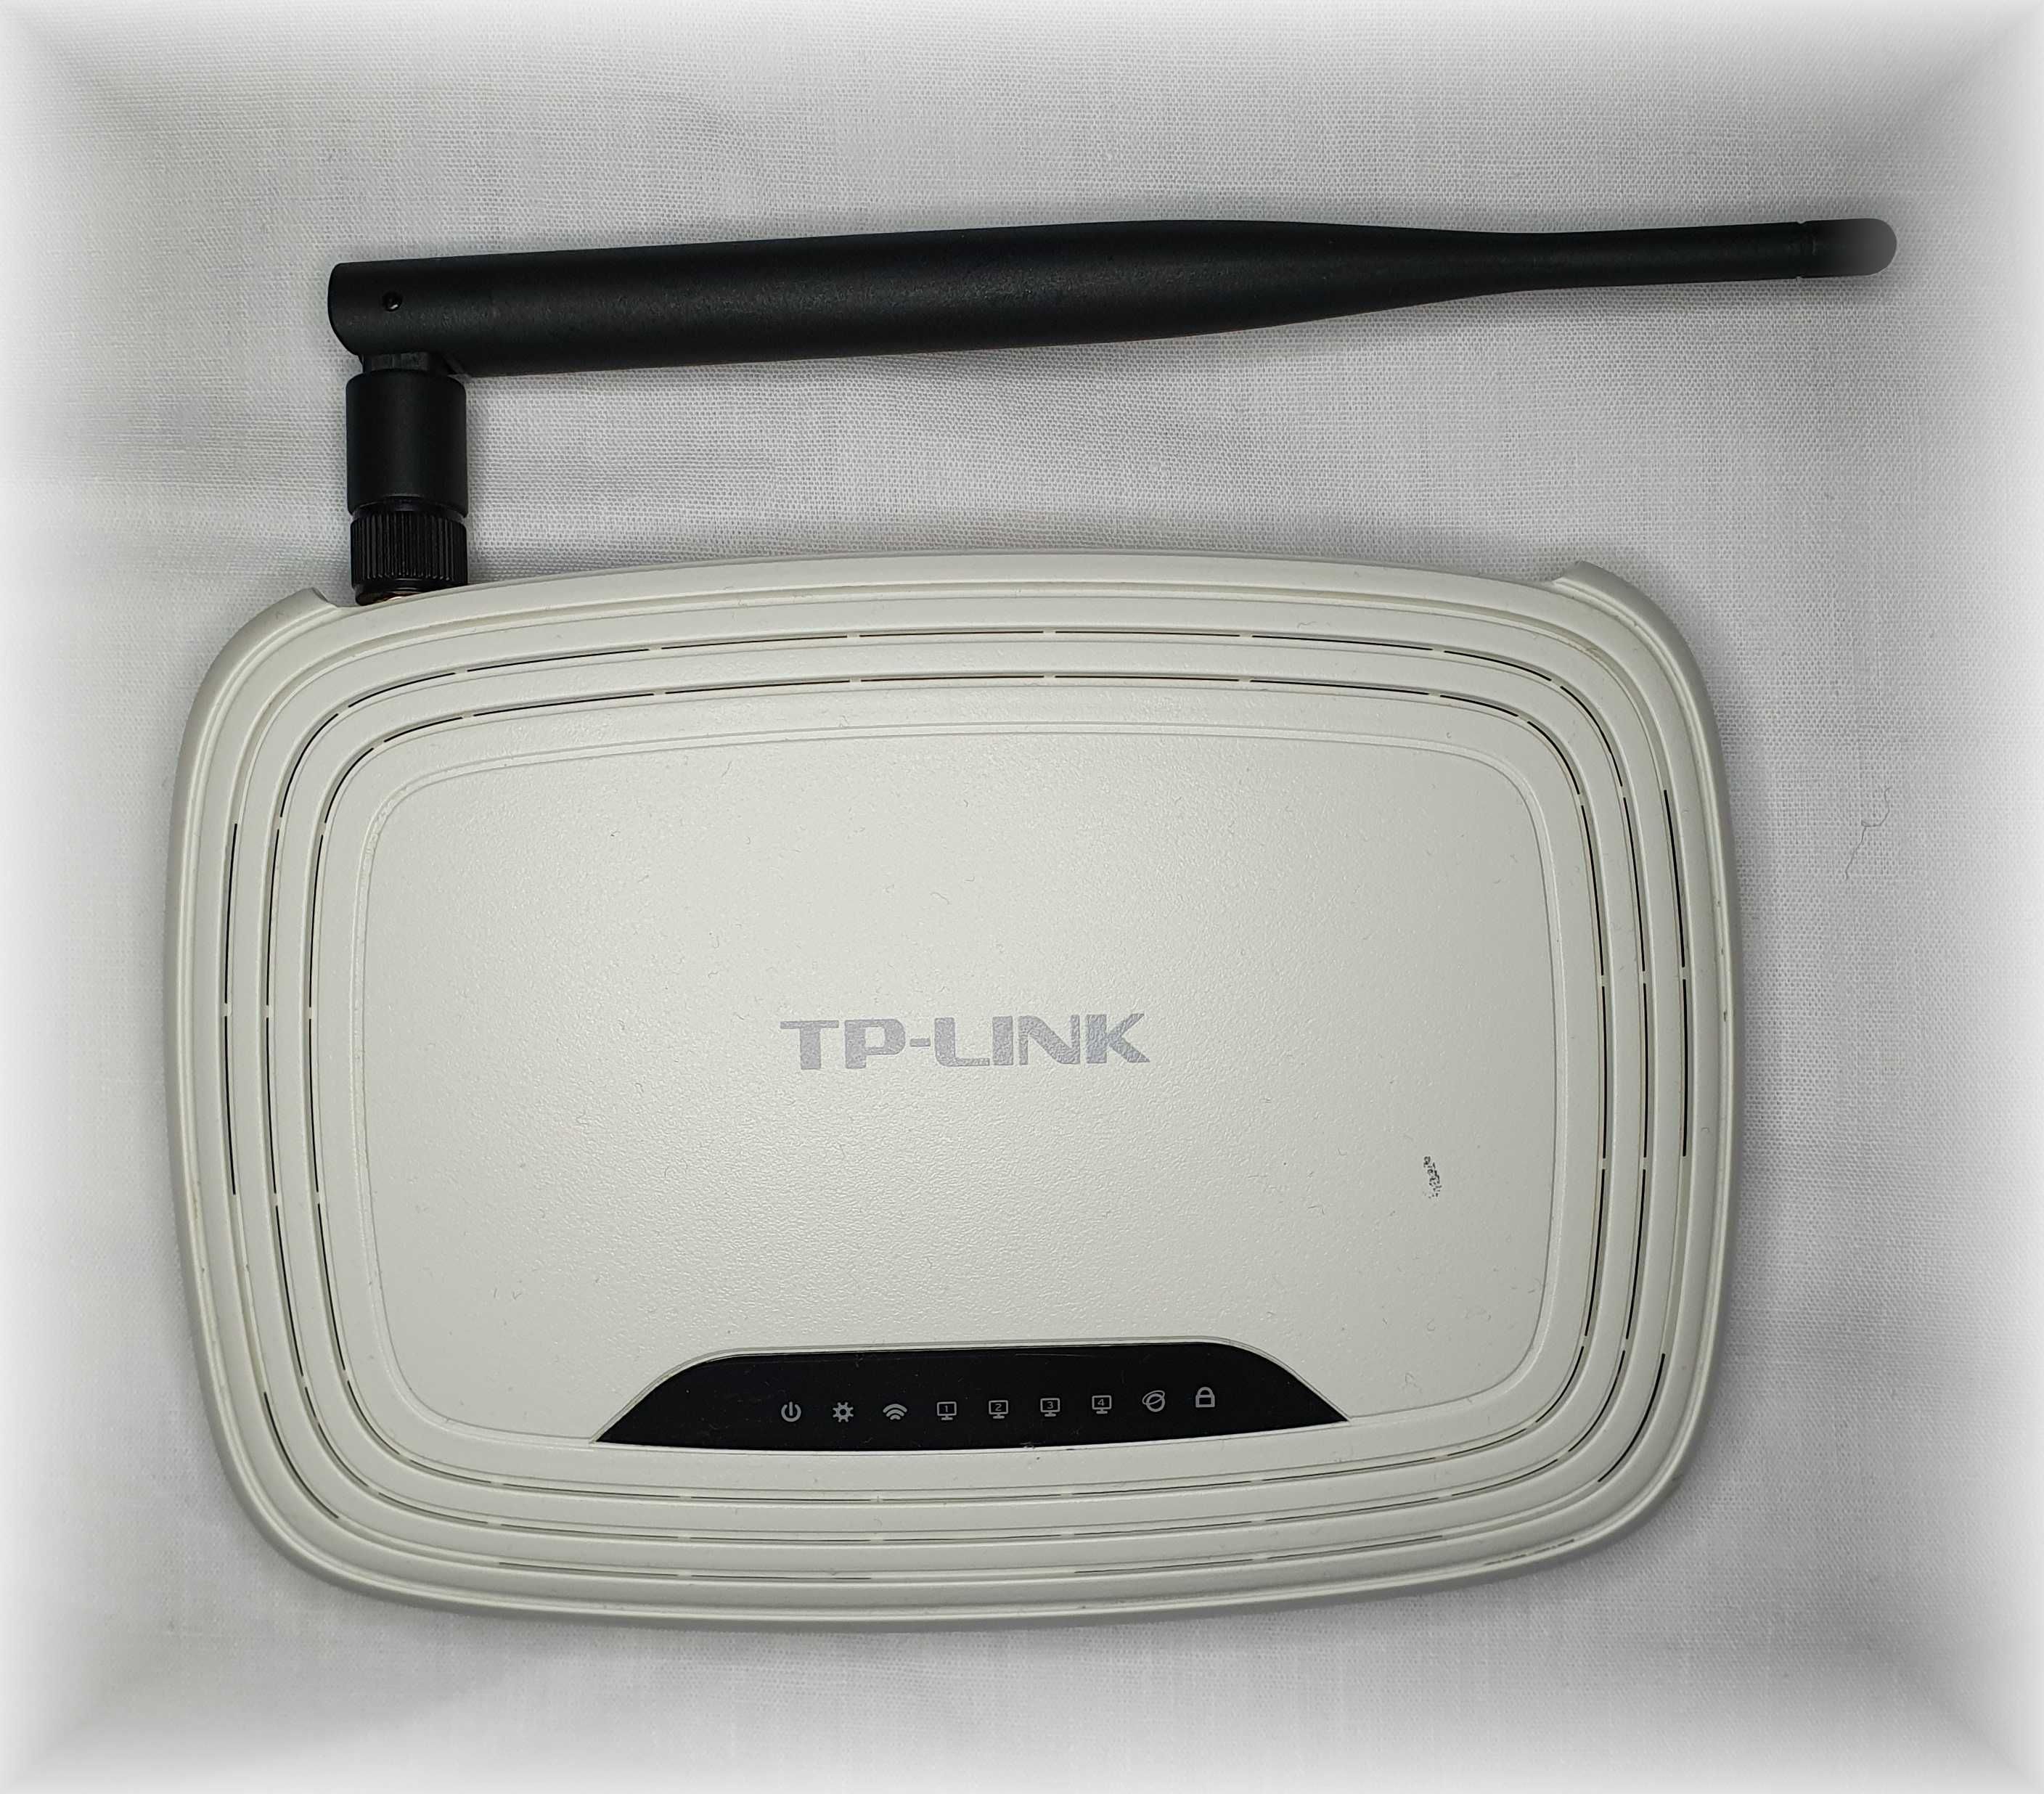 Router Wi-fi TP-LINK TL-WR741ND